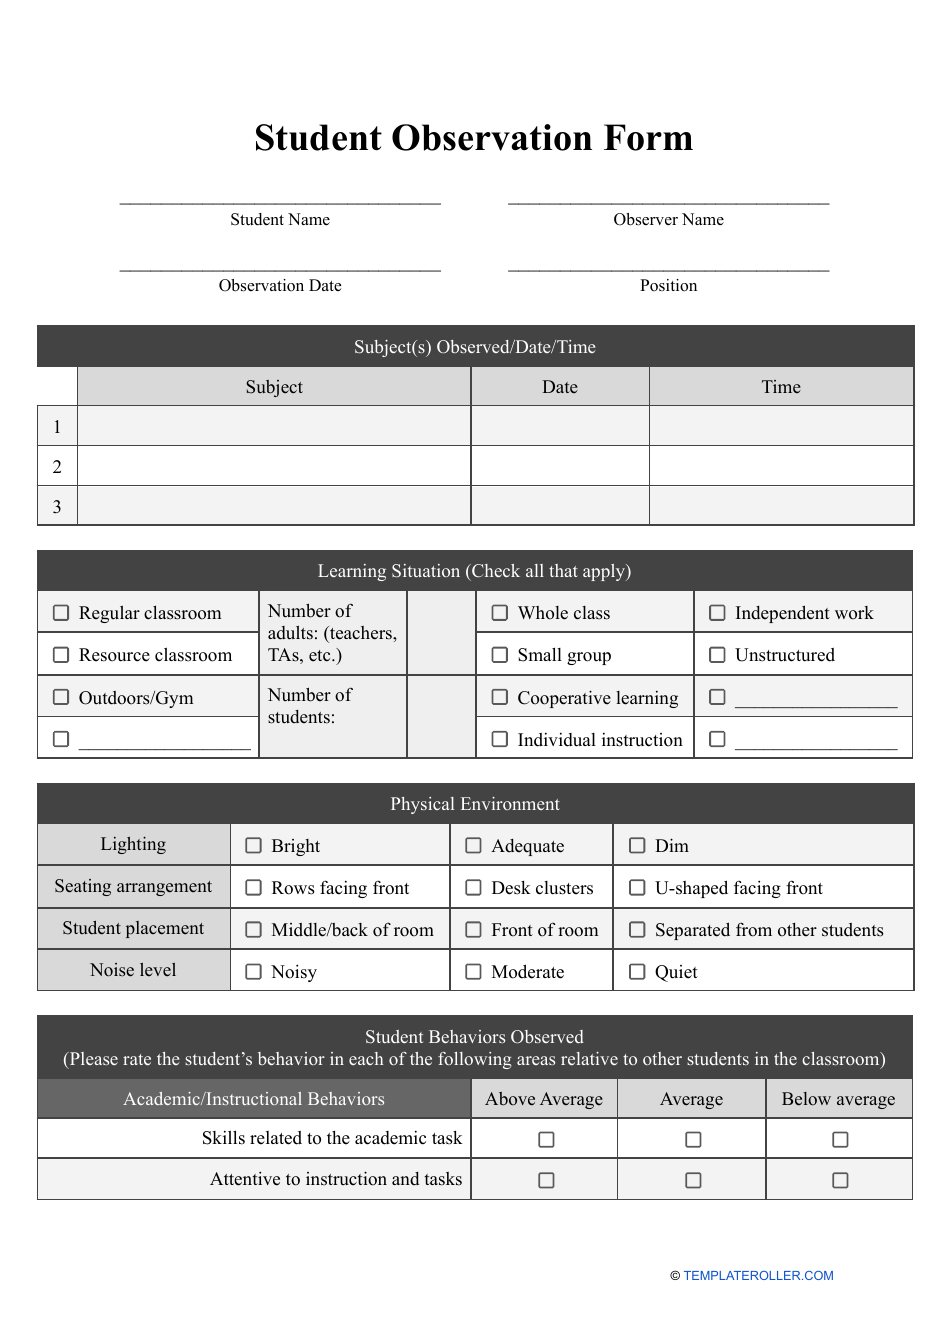 Student Observation Form - Tables, Page 1